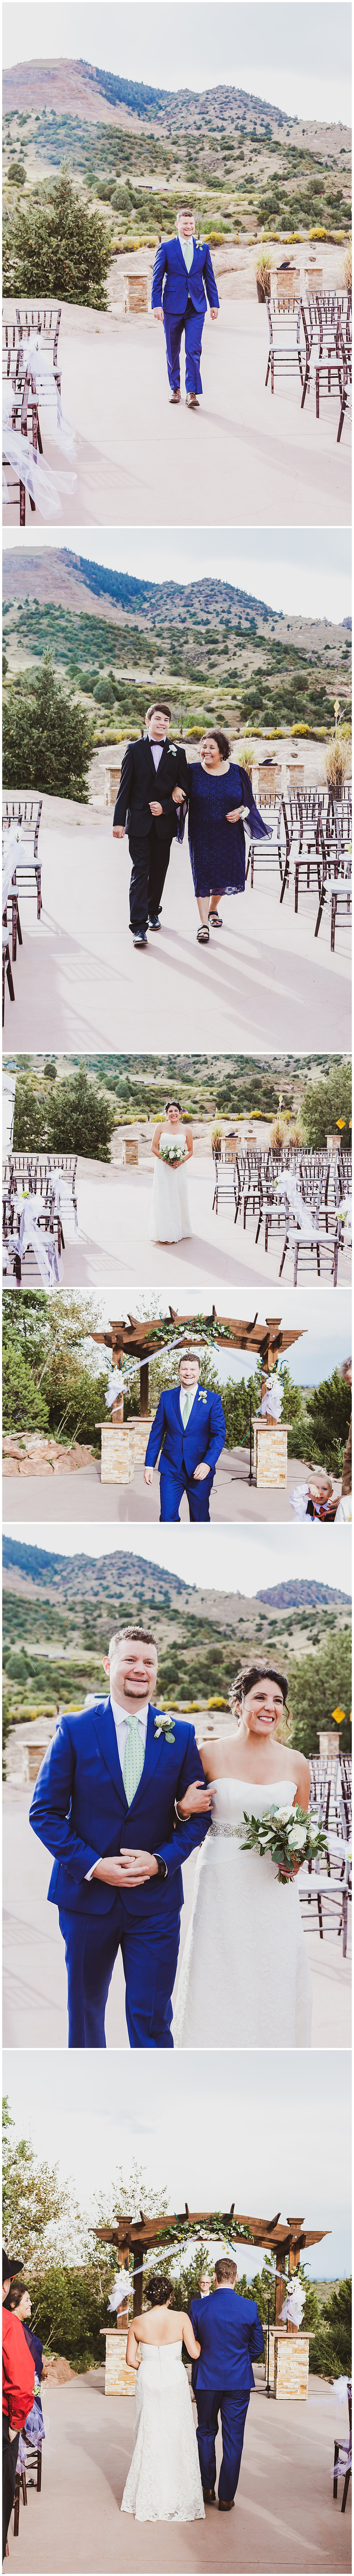 outdoor ceremony at willow ridge manor in morrison, co